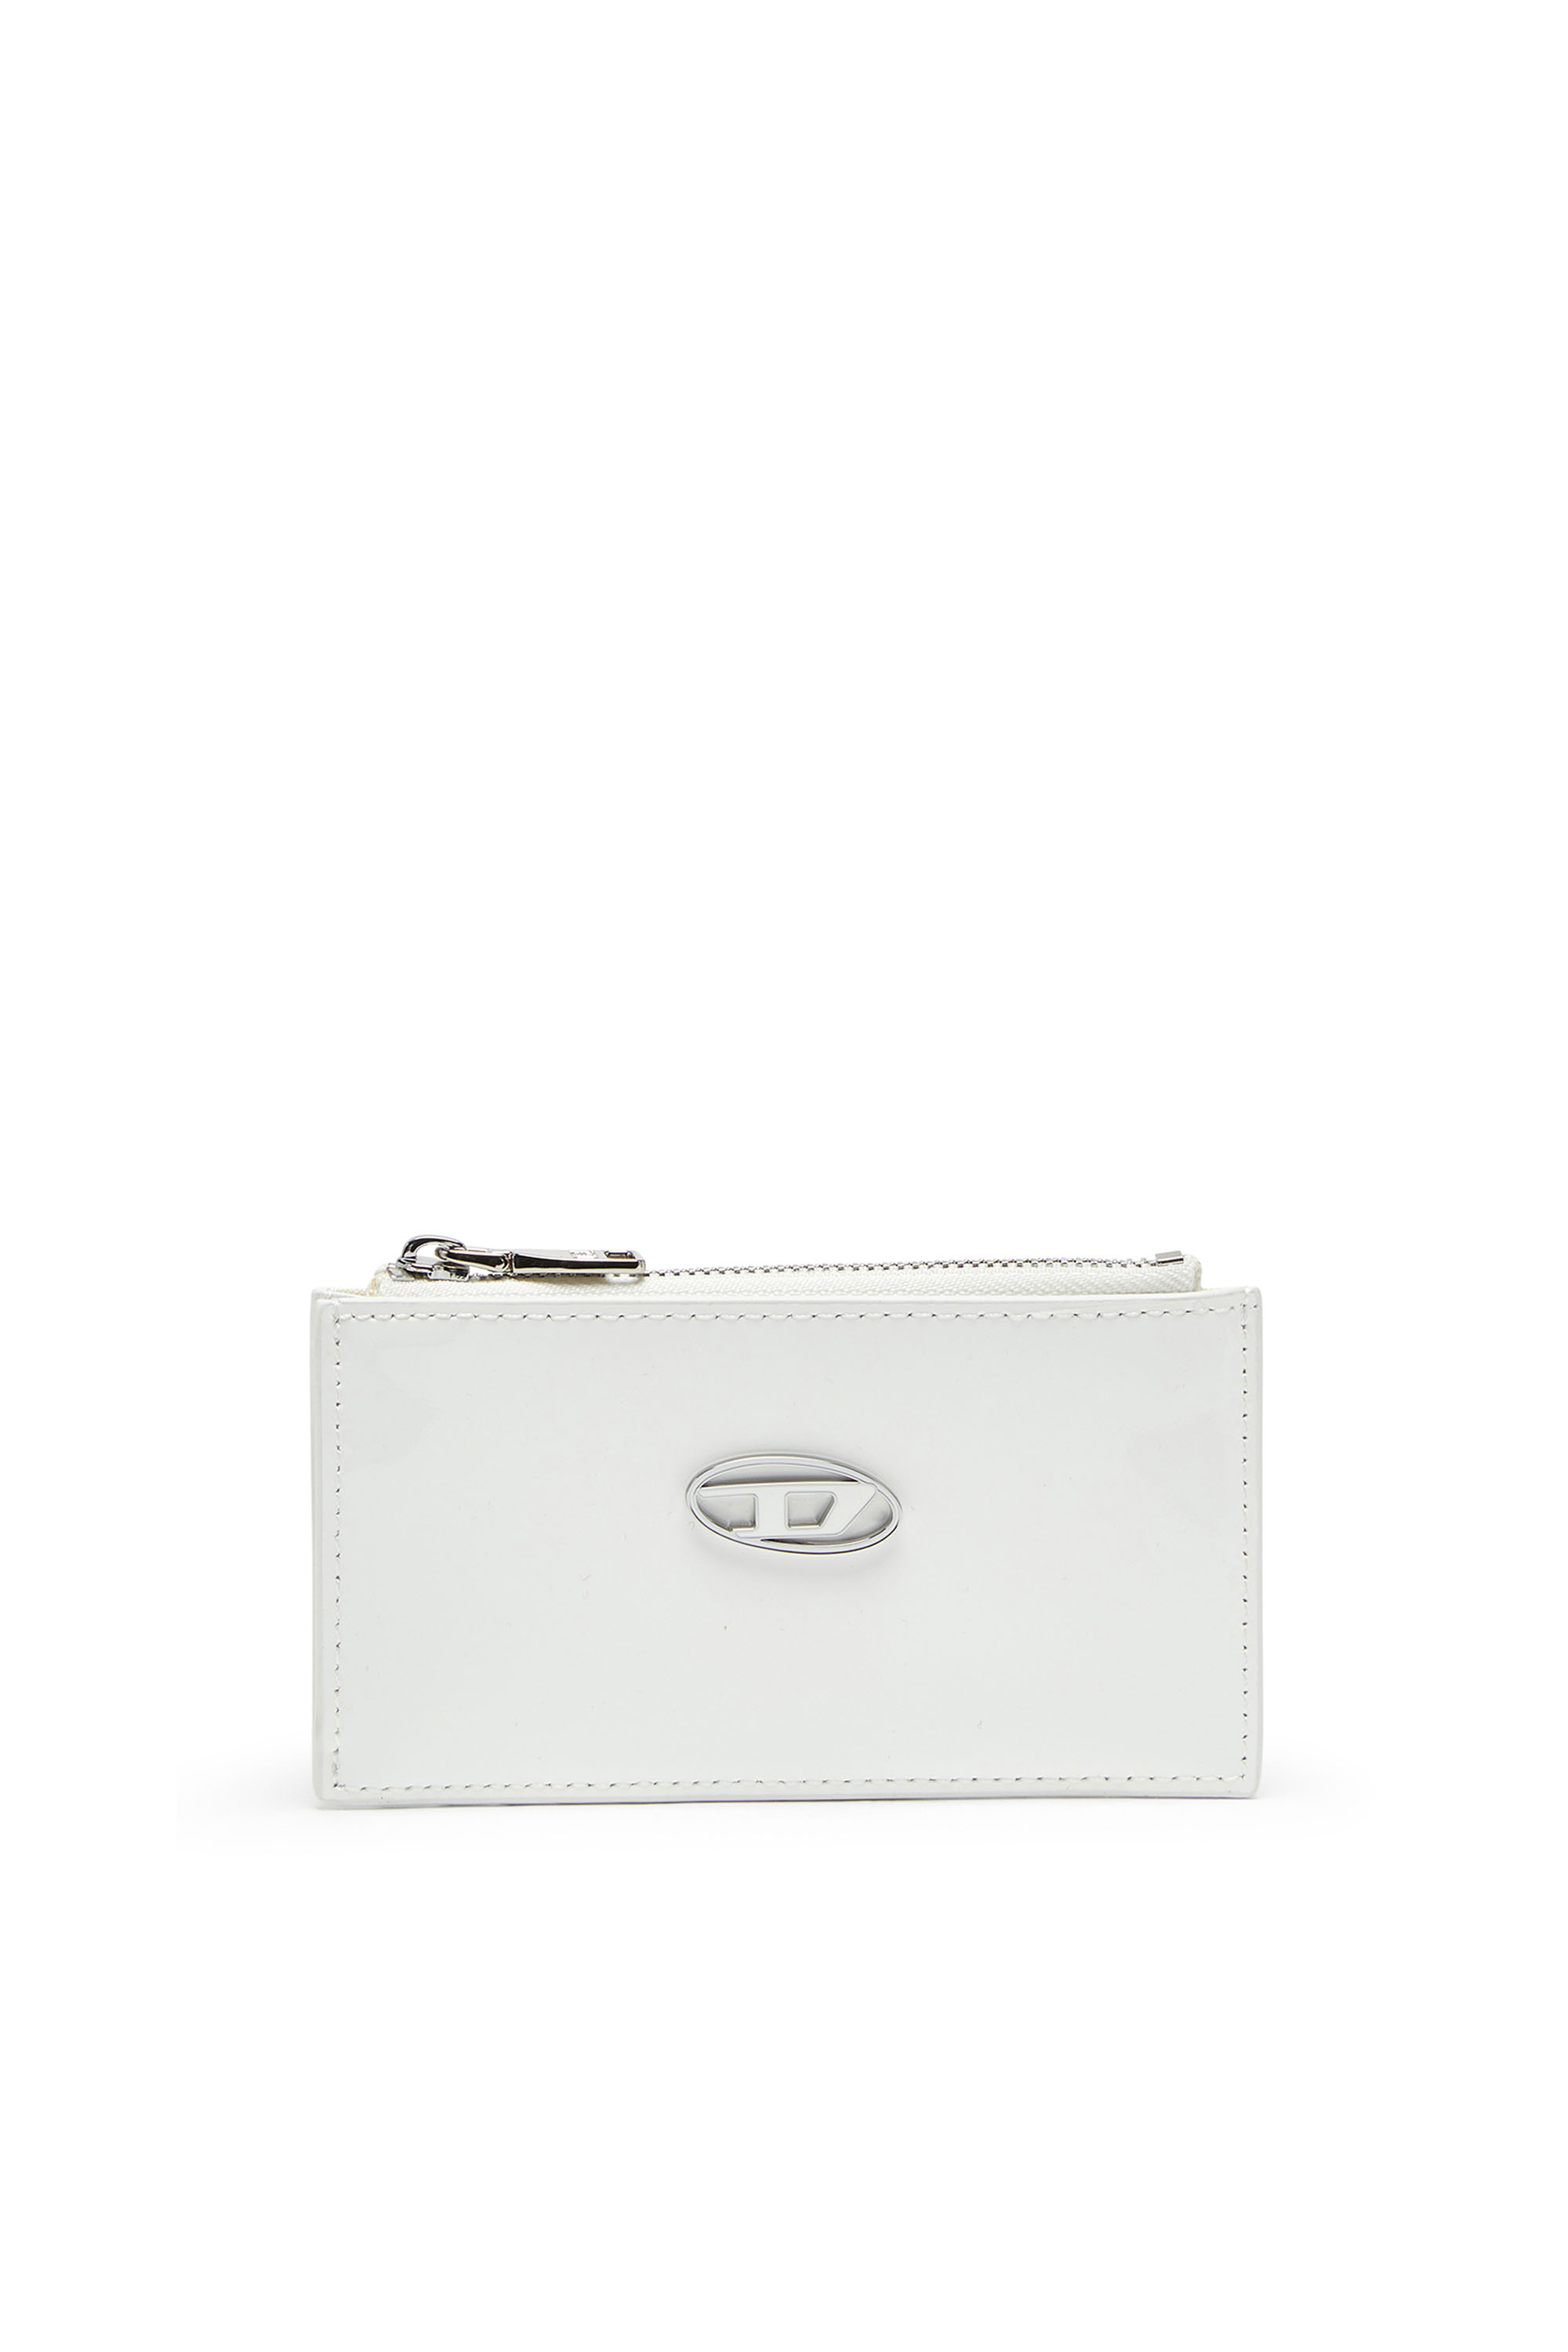 Diesel - PLAY CARD HOLDER III, Female Card holder in glossy leather in ホワイト - Image 1